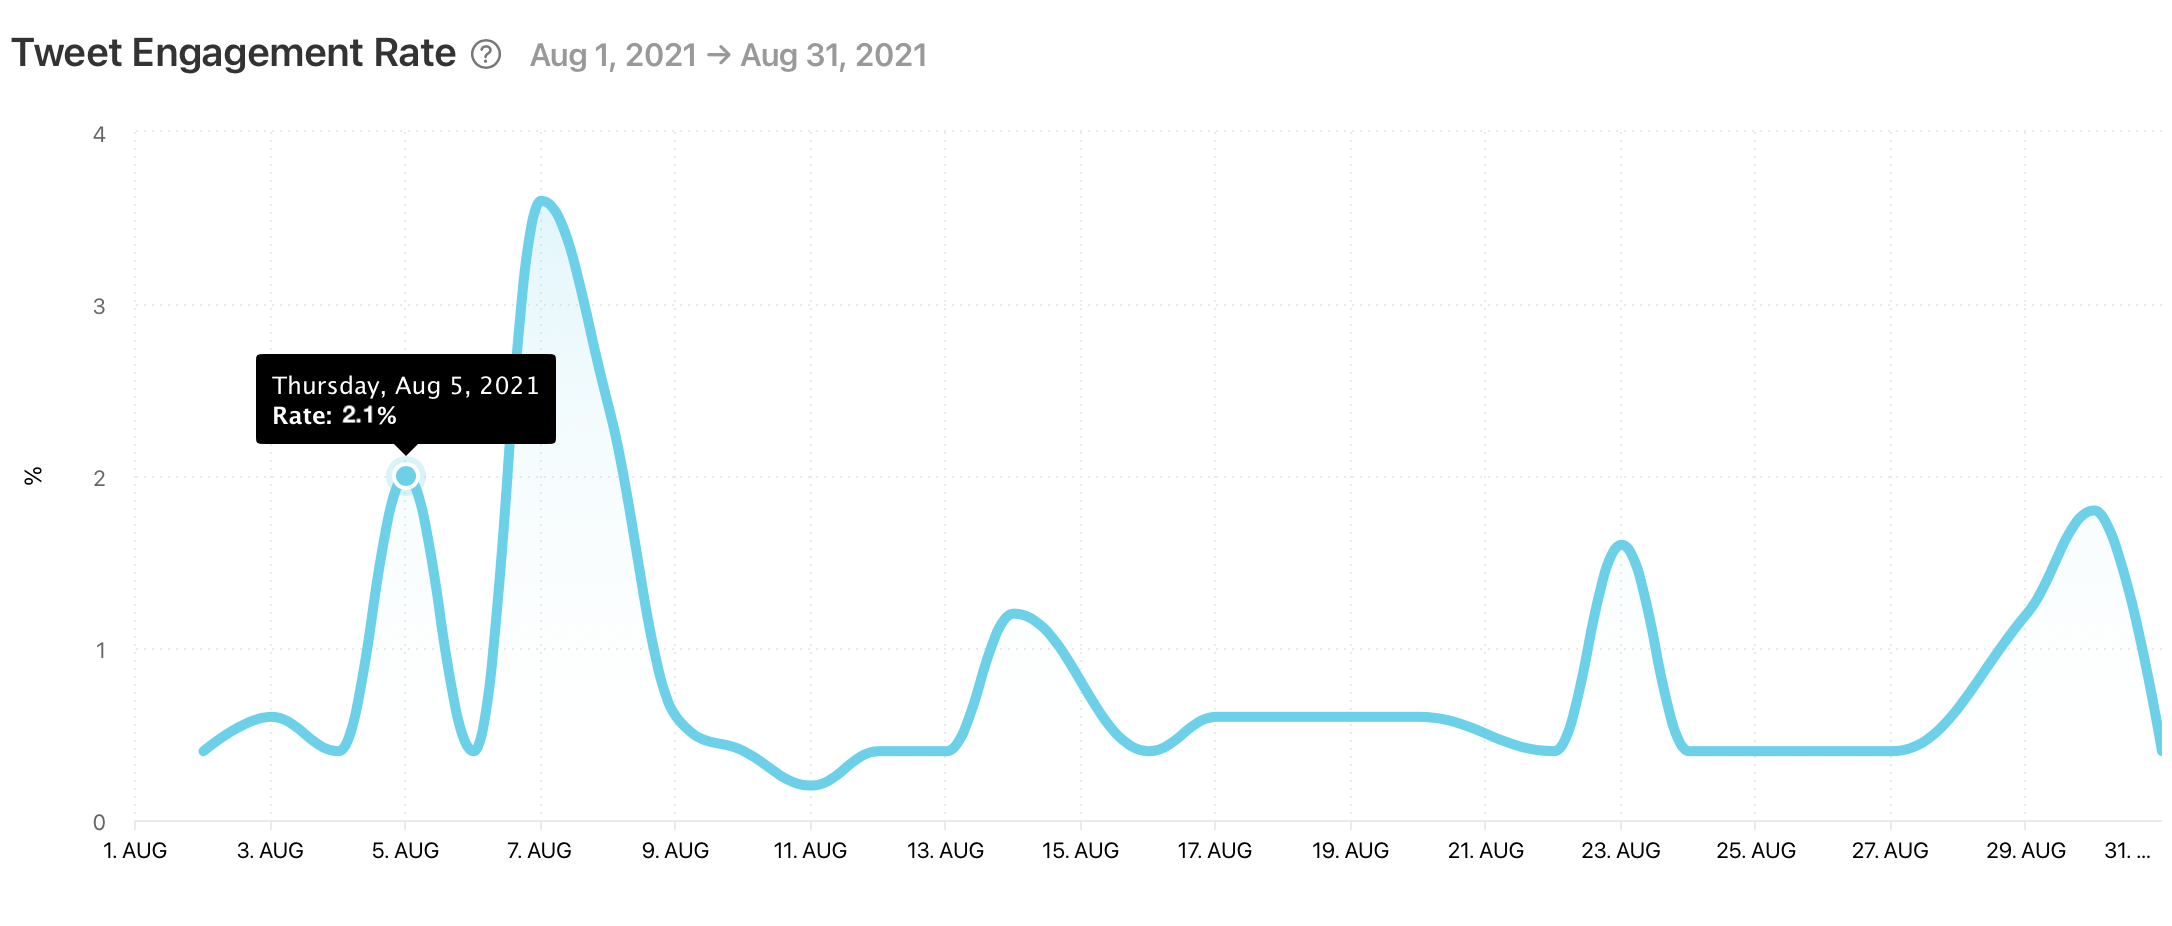  Tweet Engagement Rate graph by Minter.io